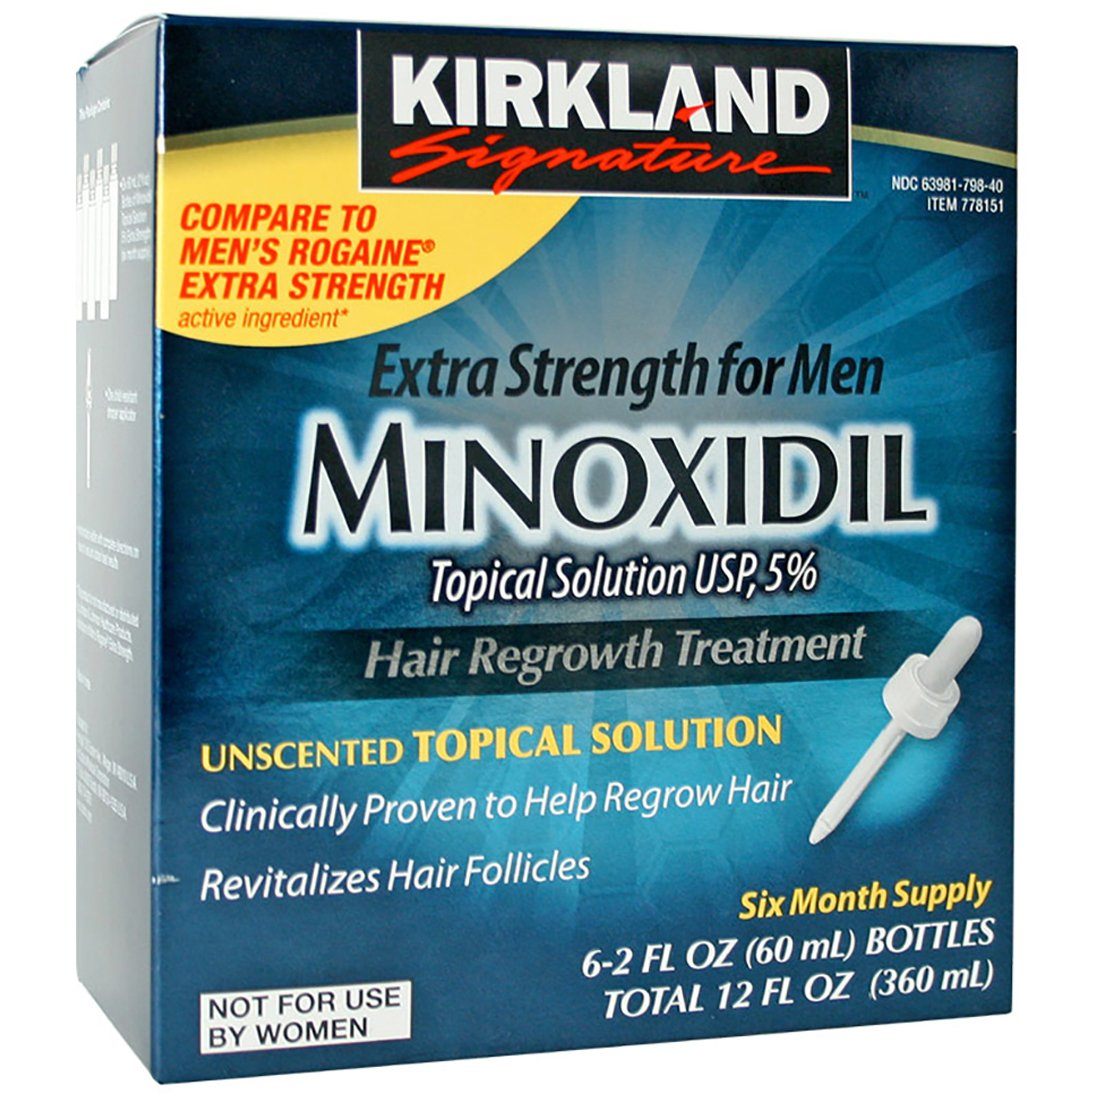 which minoxidil is best 5 or 10